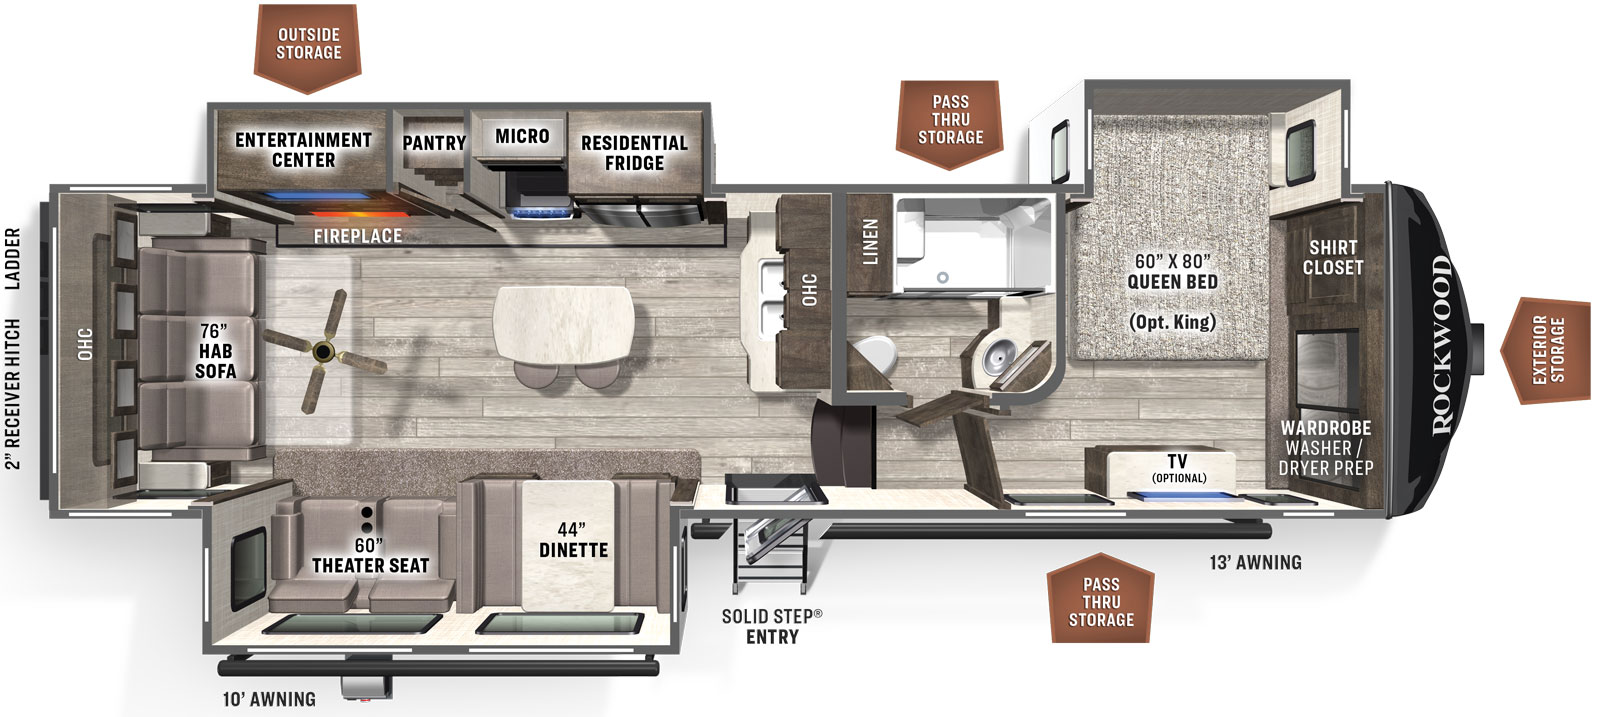 Rockwood Ultra Lite Fifth Wheels 2893BS floorplan. The 2893BS has 3 slide outs and one entry door.